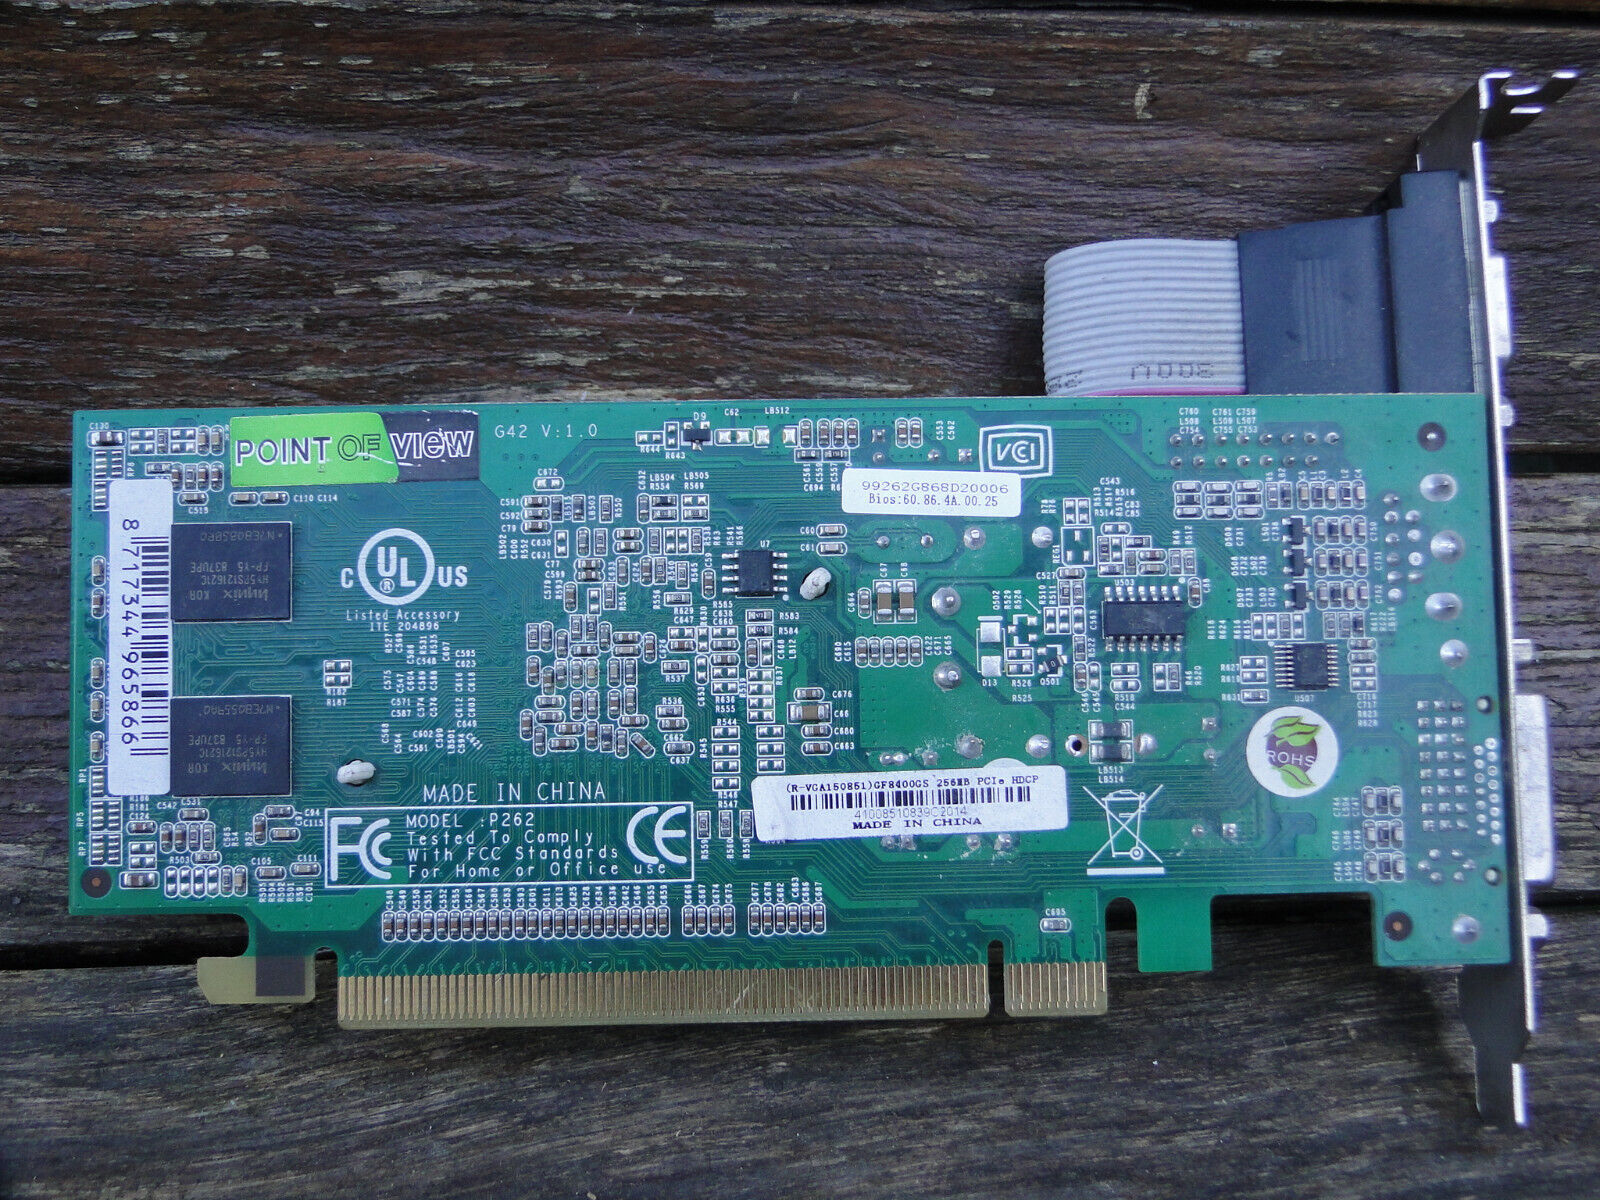 Primary image for Point of View GeForce GF 8400 GS PCI-E 256Mb DVI/VGA/ S- Video Graphics Card